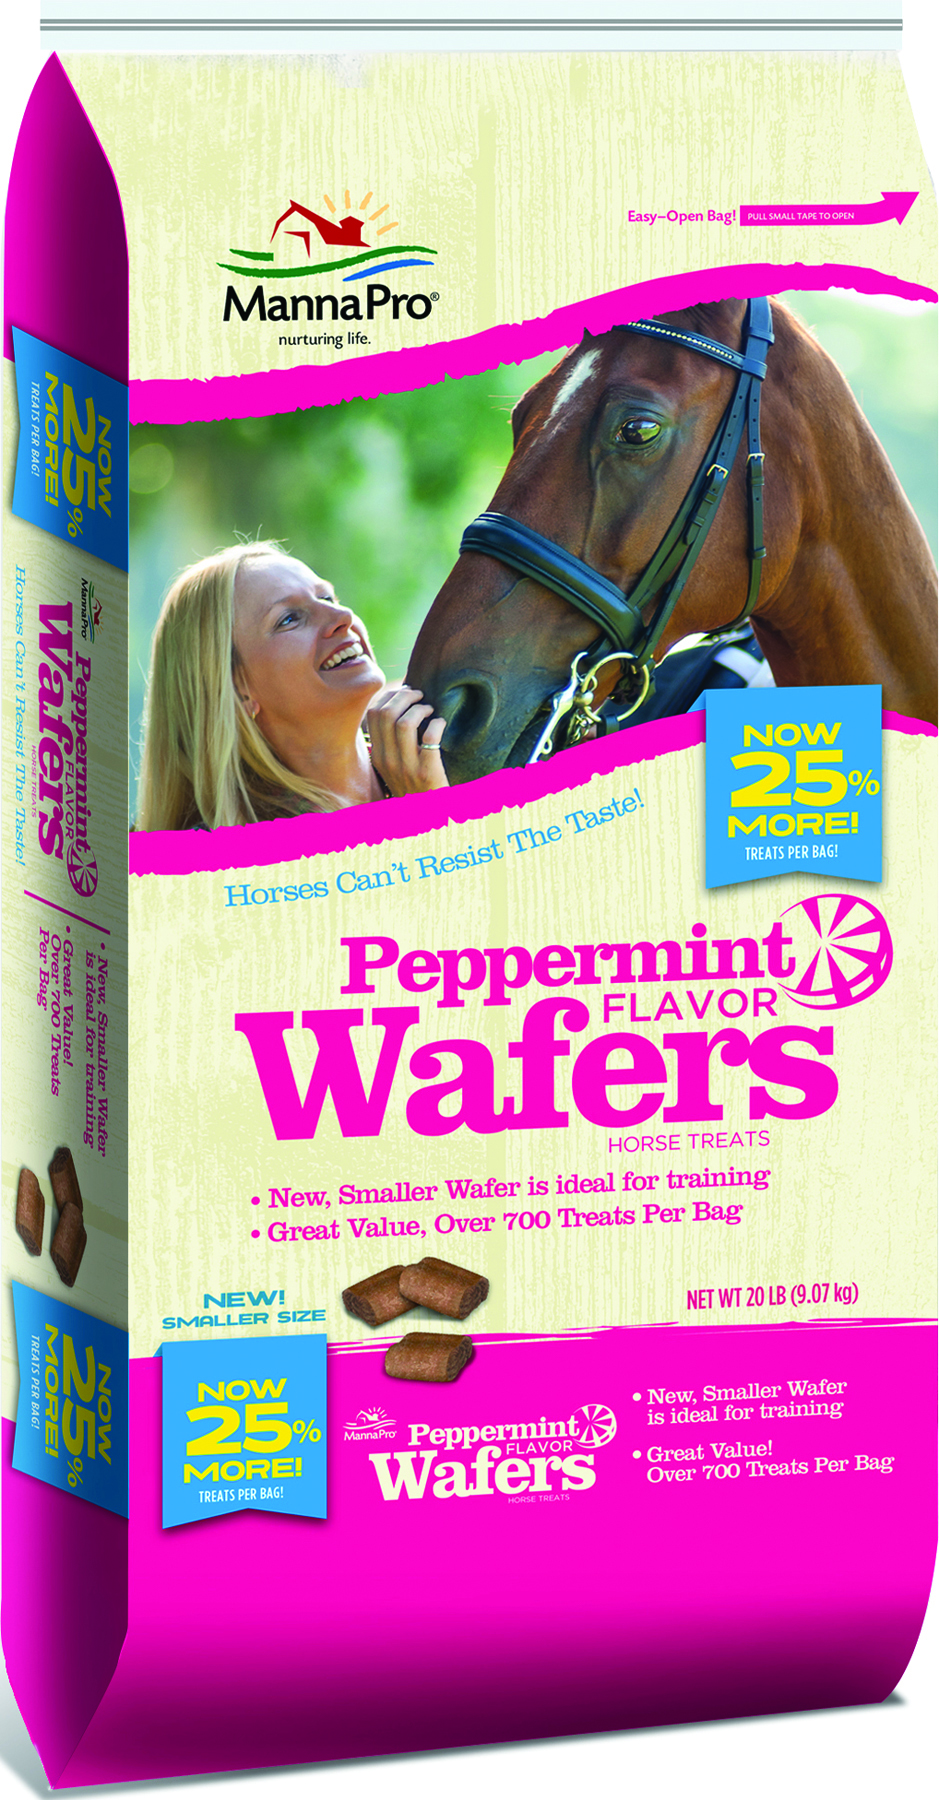 WAFERS